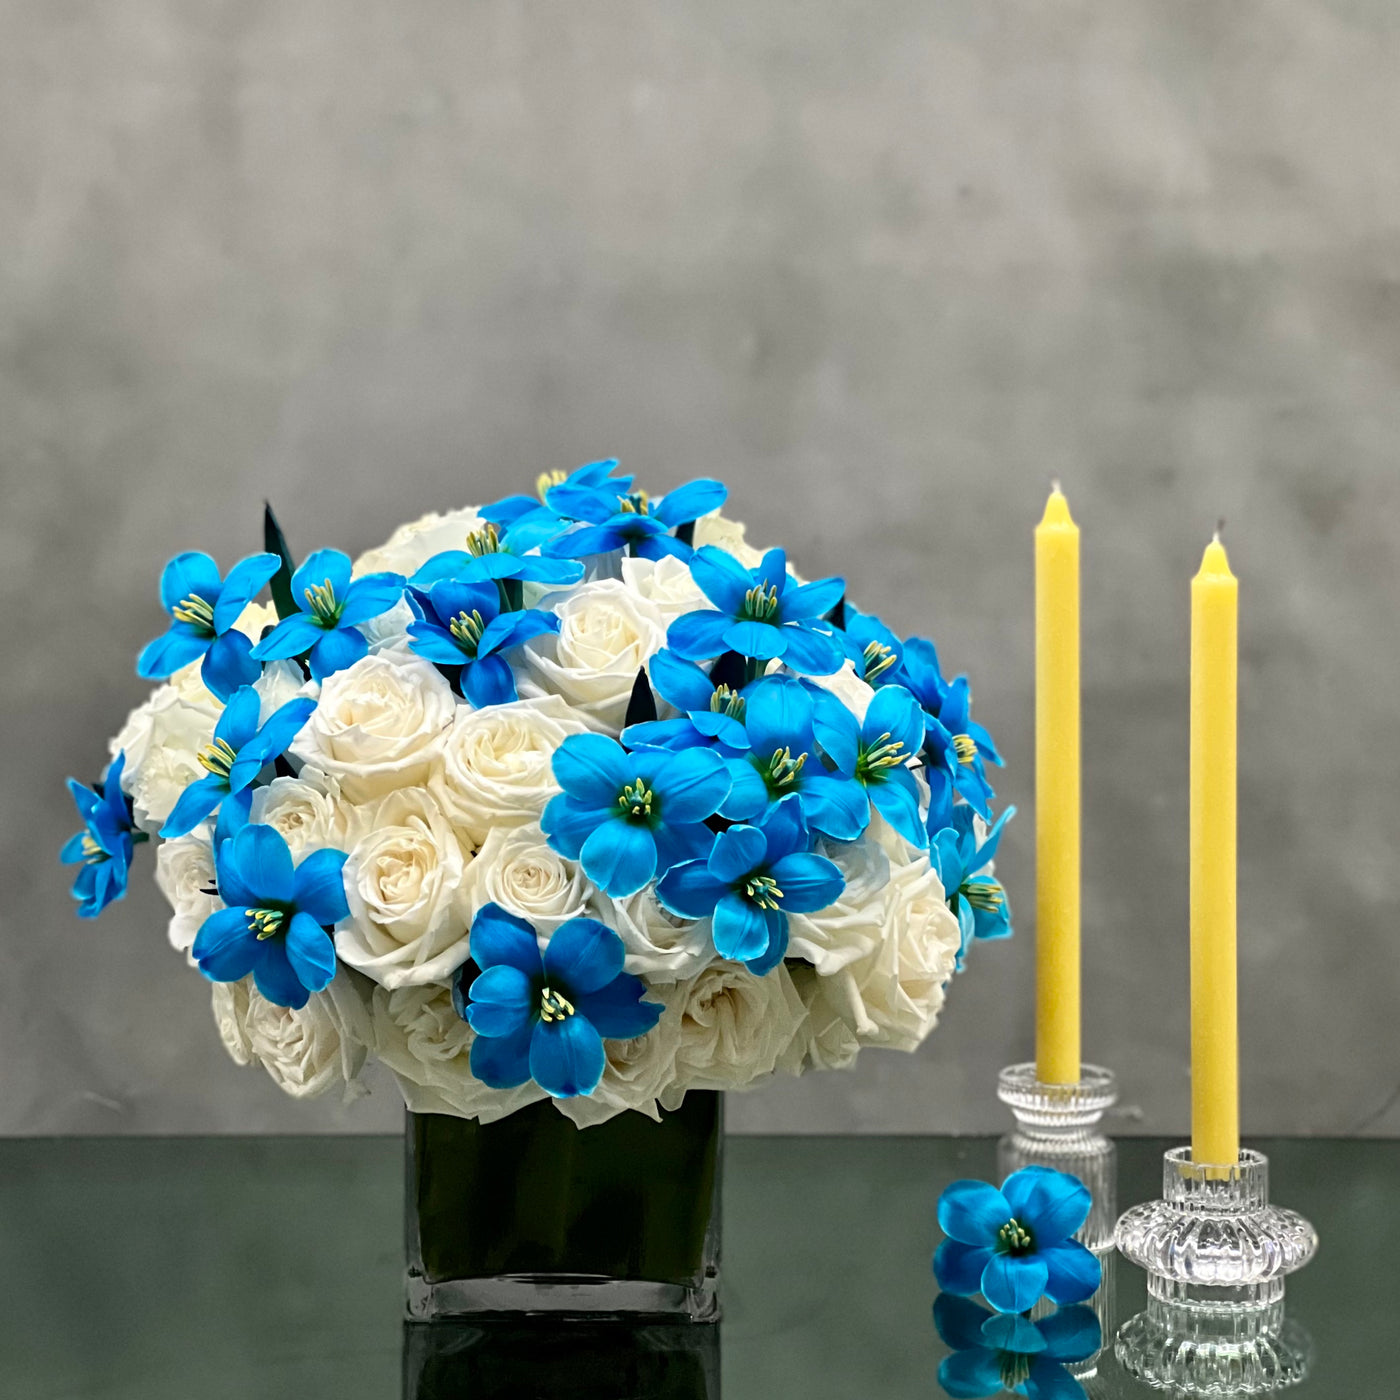 Our team at Beverly Hills Florist presents same day delivery for our Butterfly Kisses arrangement. Beautifully arranged in a glass vase are approximately 50 White Roses and 40 Blue Tulips placed in a 6x6 glass vase. Butterfly Kisses is the perfect floral piece that will brighten up wherever it is placed ! As pretty as it looks, our arrangement makes for a wonderful birthday gift, thank you & just because.